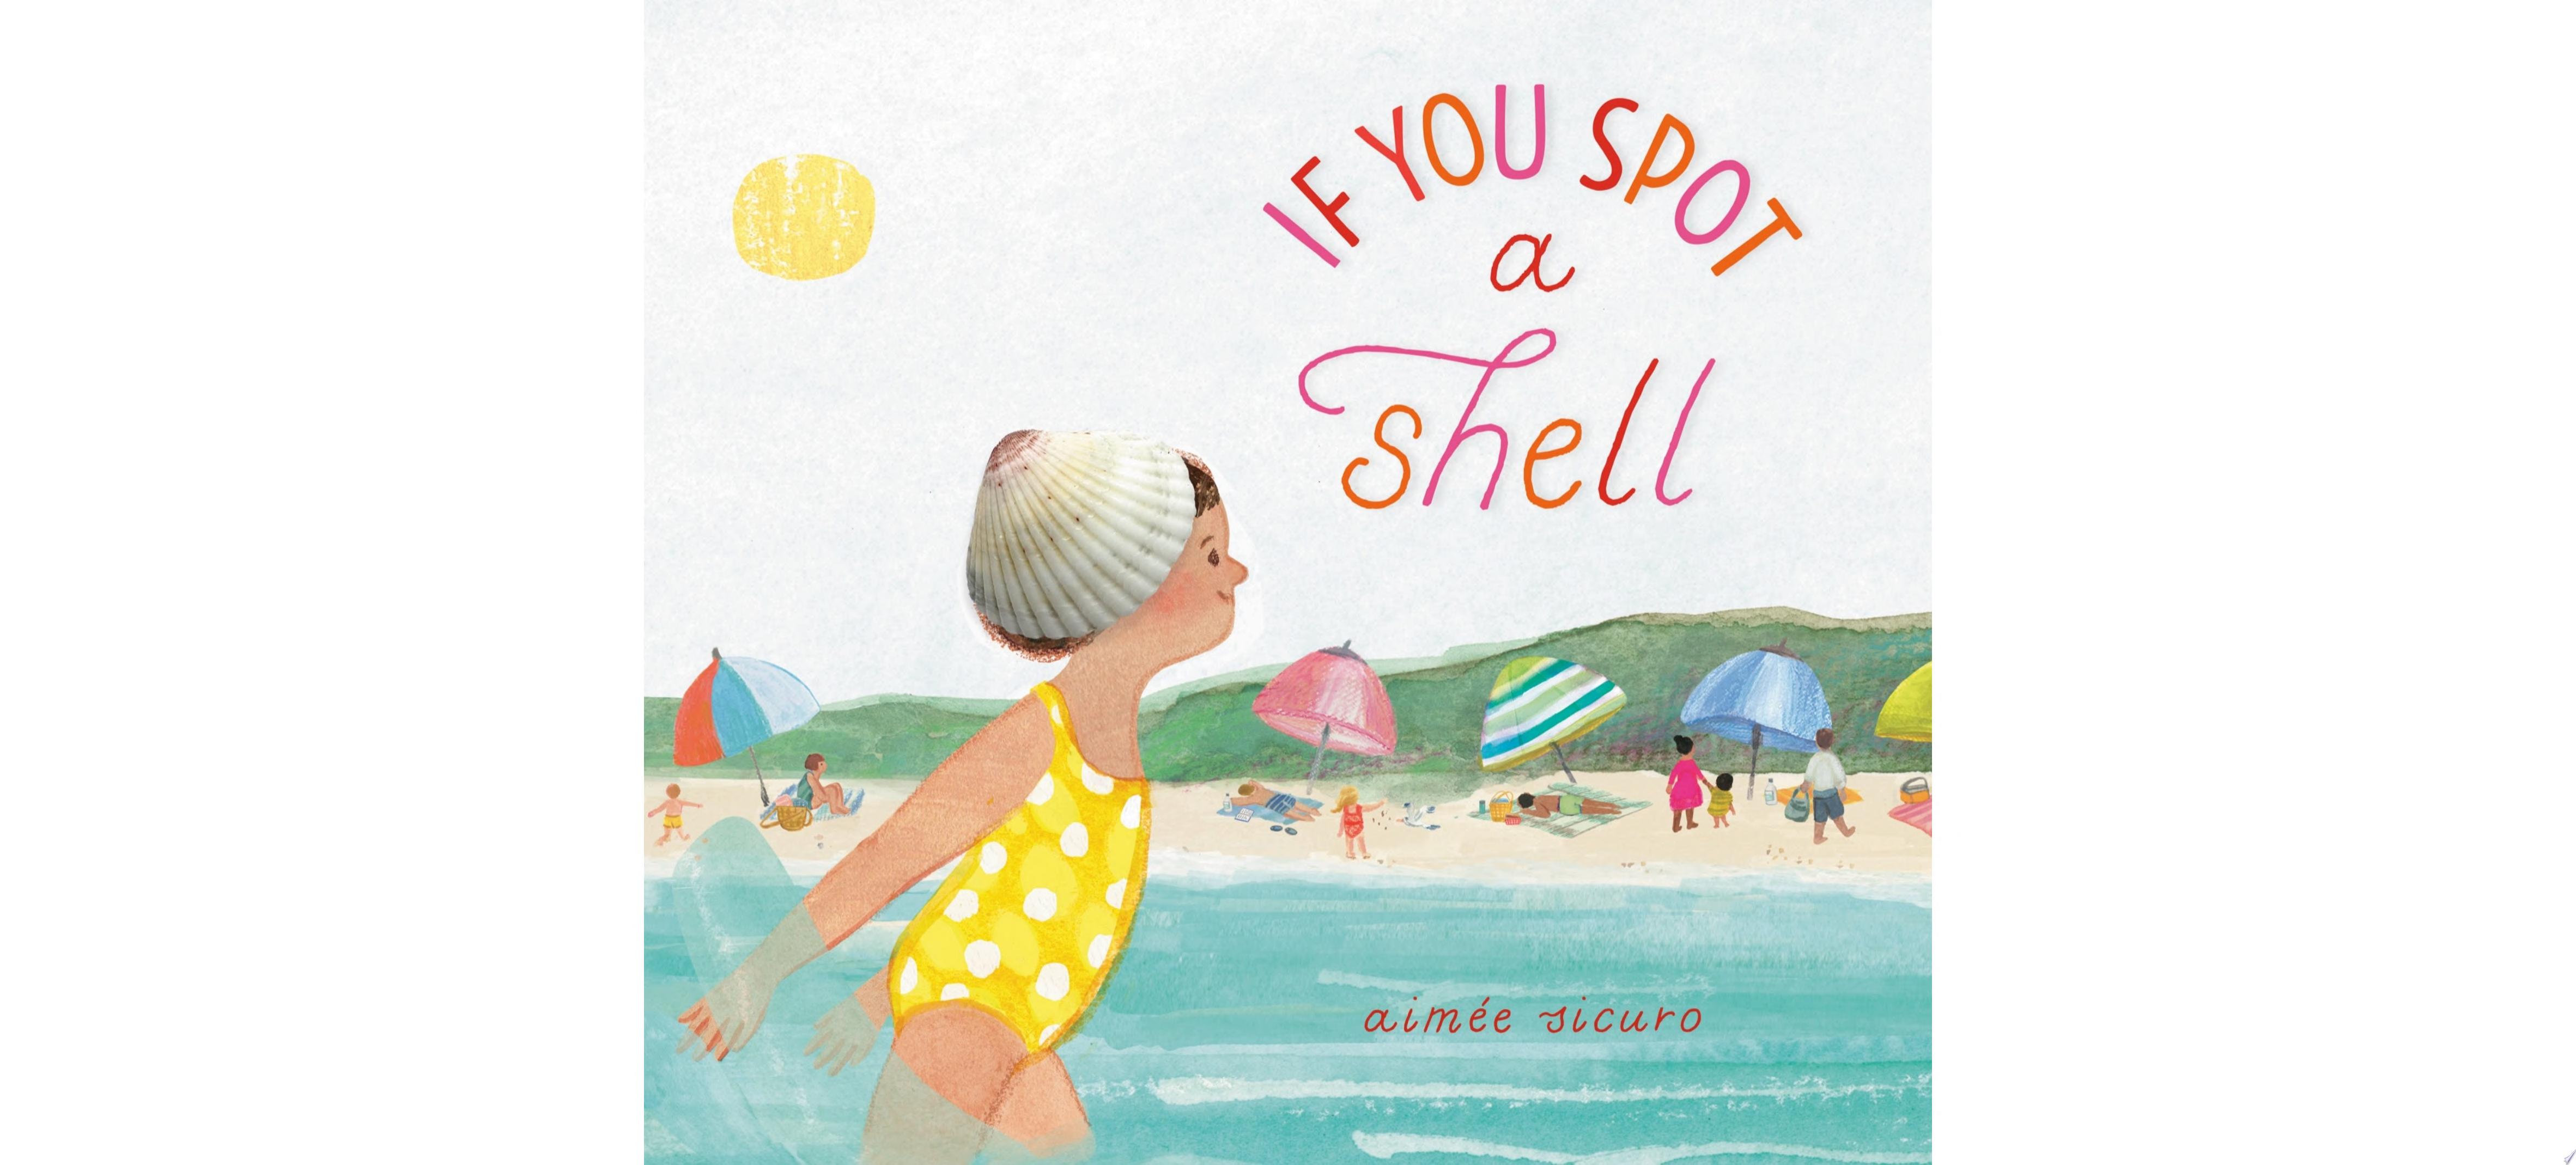 Image for "If You Spot a Shell"